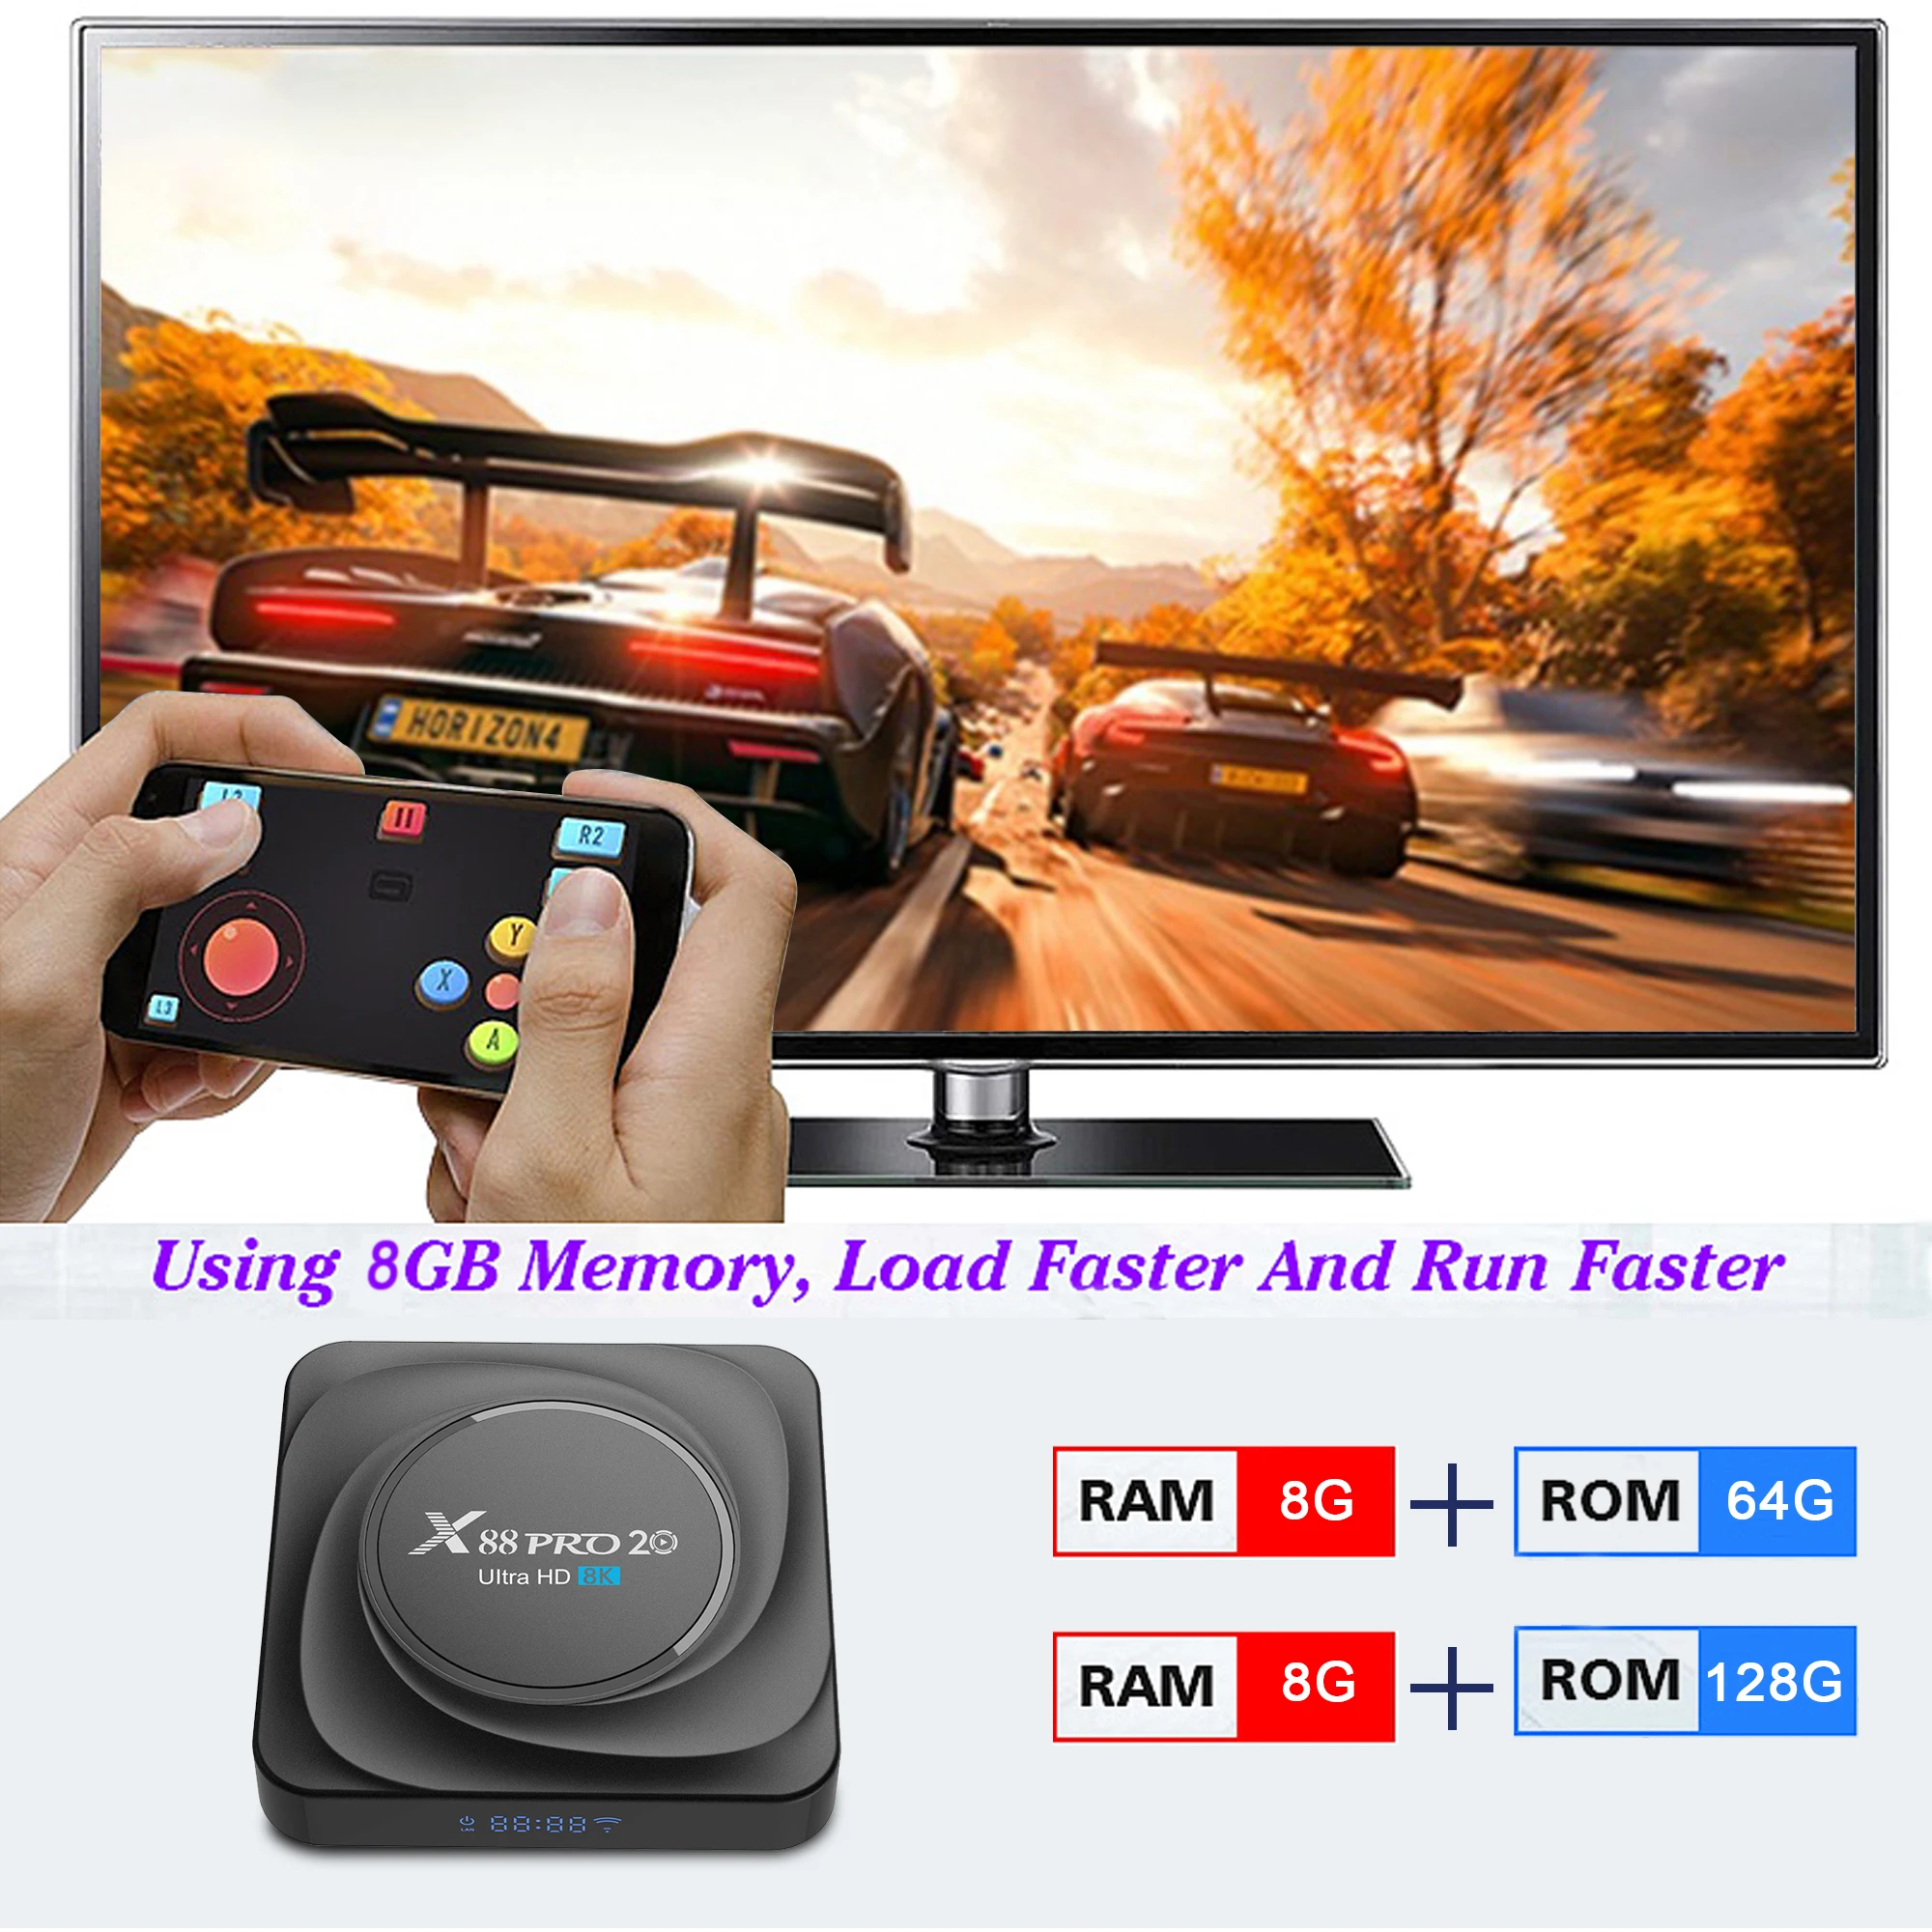 android 11 tv box x88 pro 20 8gb ram 128gb rk3566 with bt voice control youtube media player 1000m ethernet 5g dual wifi free global shipping